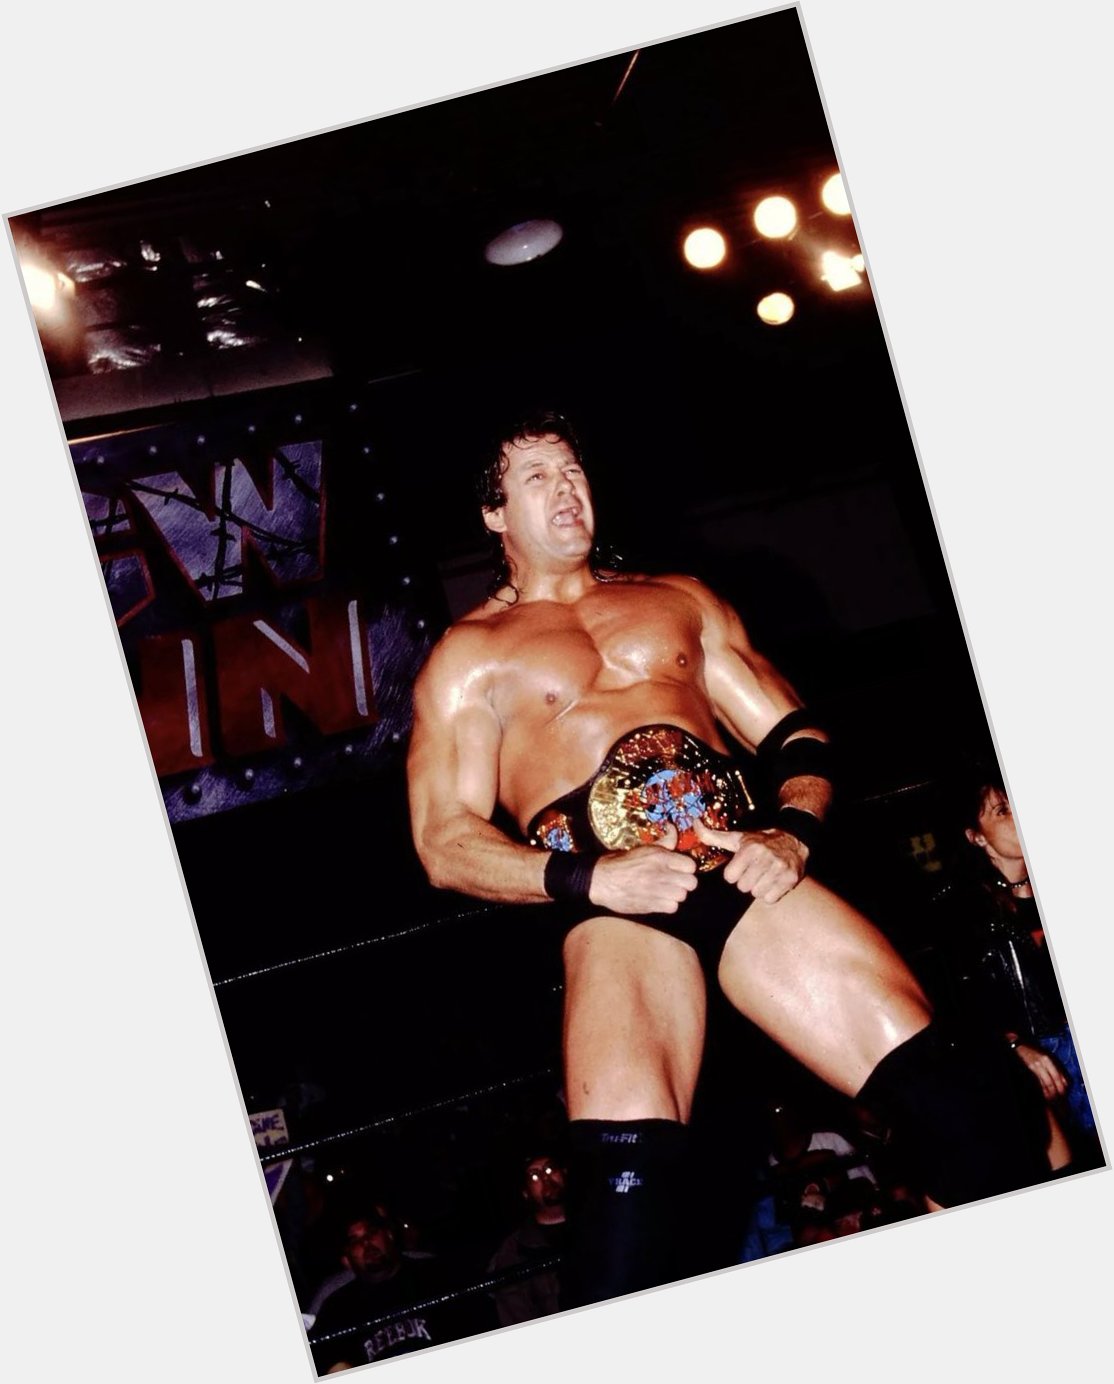 Also a special happy birthday to the late great ECW legend Mike Awesome! Who would have been 56 today! 